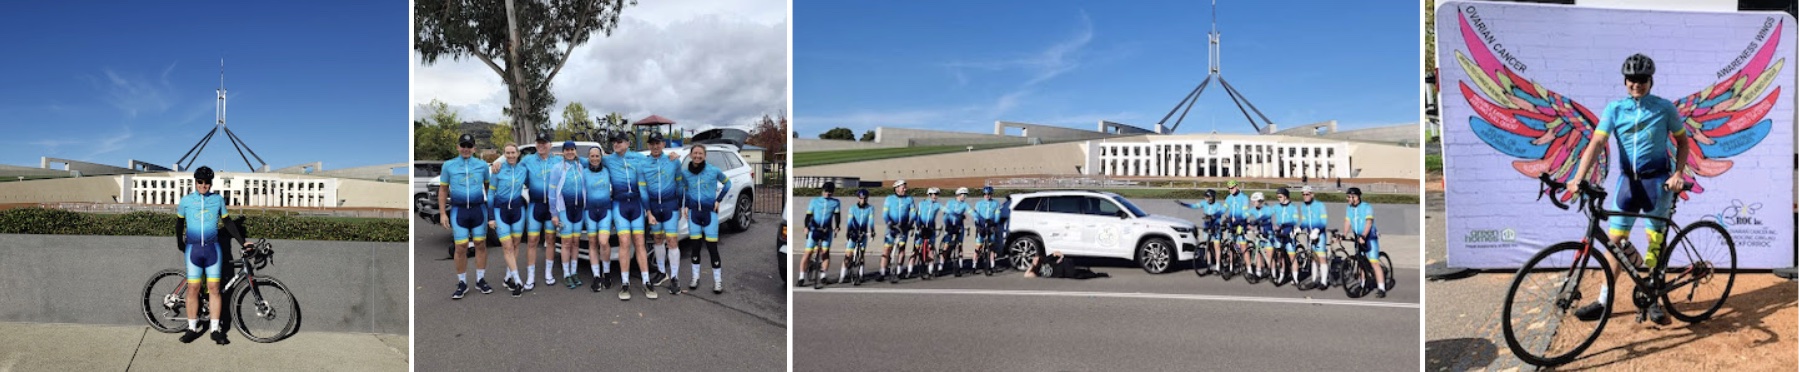 Dr Simon Chu takes part in Ride4Research with a crew of dedicated supporters and cyclists, making the trek from Canberra to Melbourne, raising vital funds and awareness for ovarian cancer.